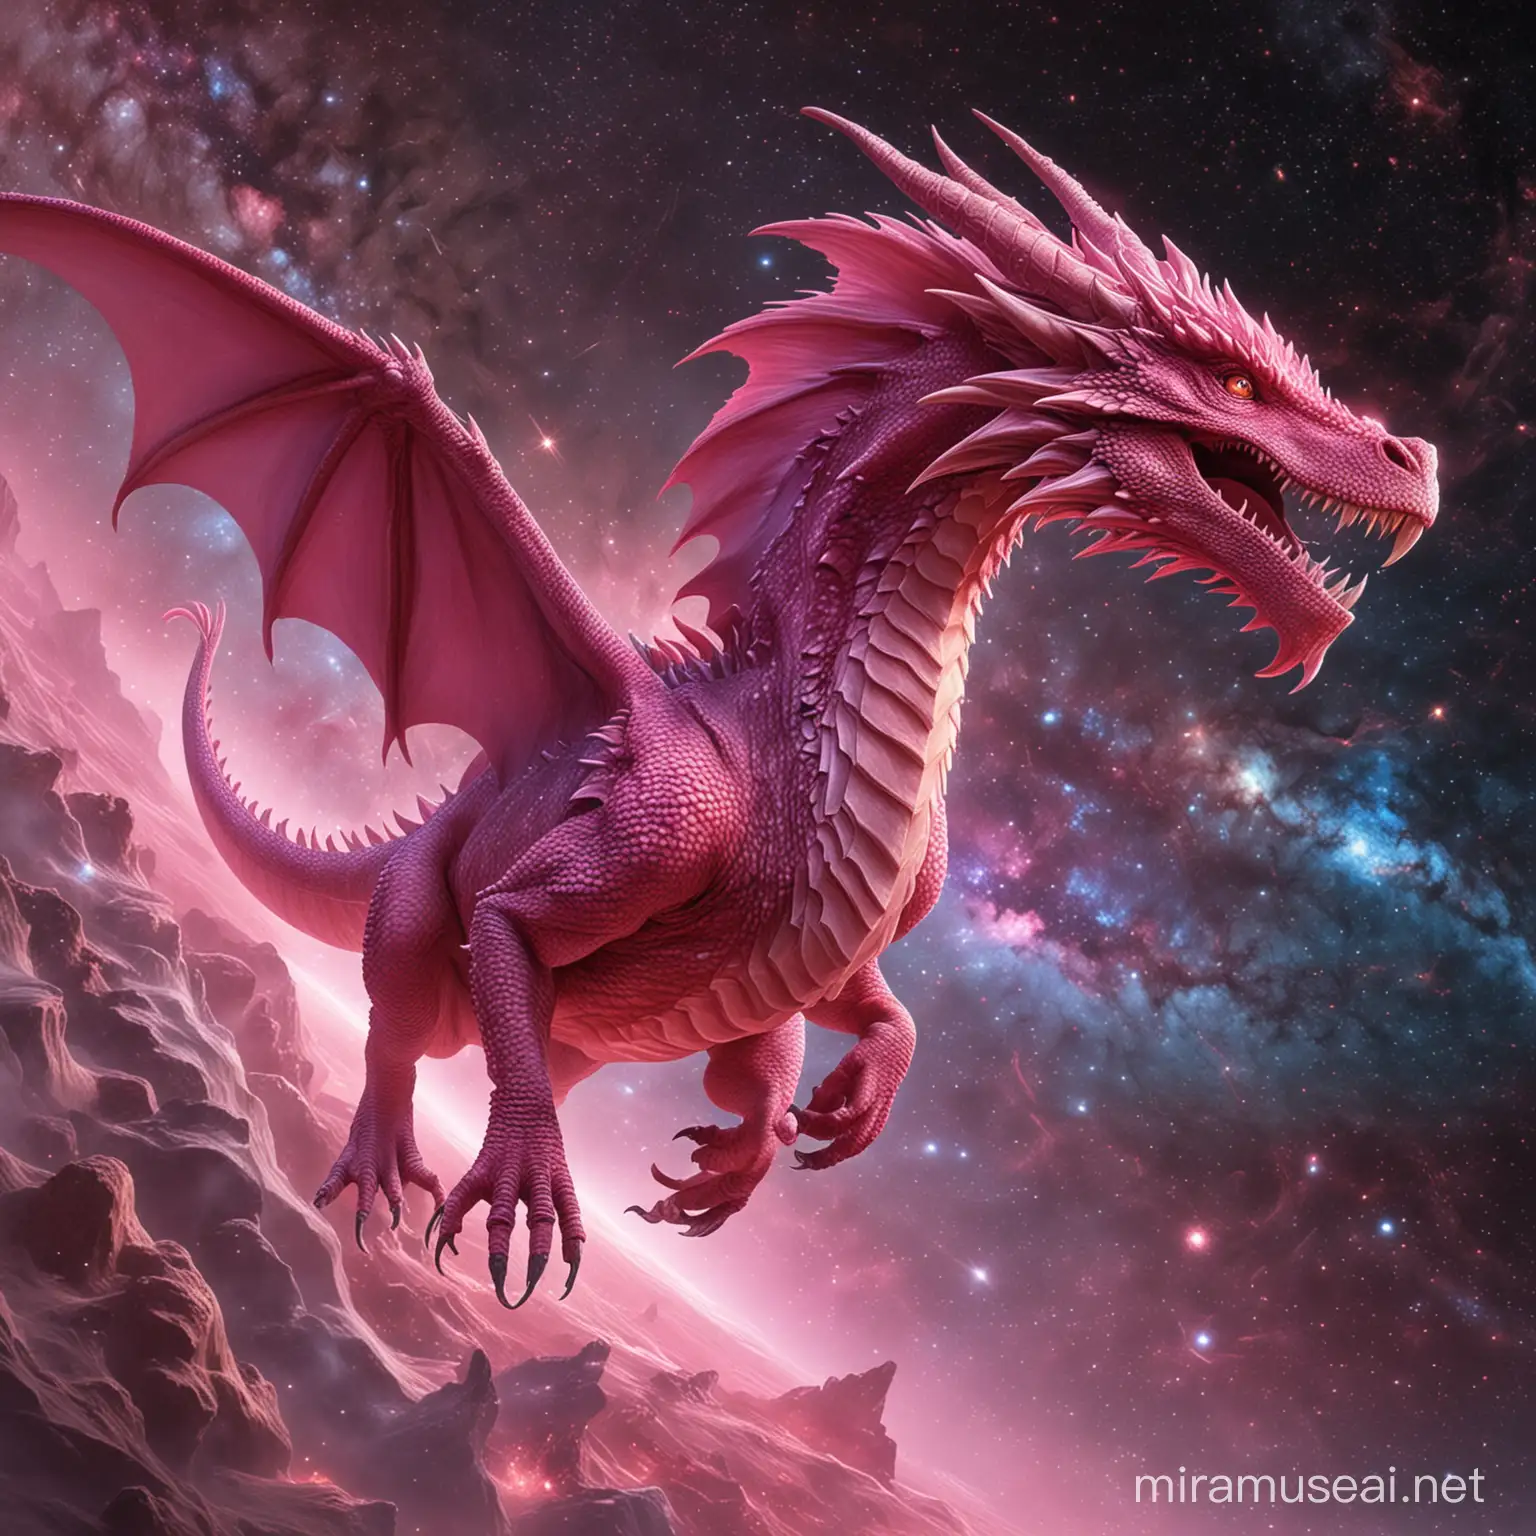 A cosmic pink dragon from Andromeda